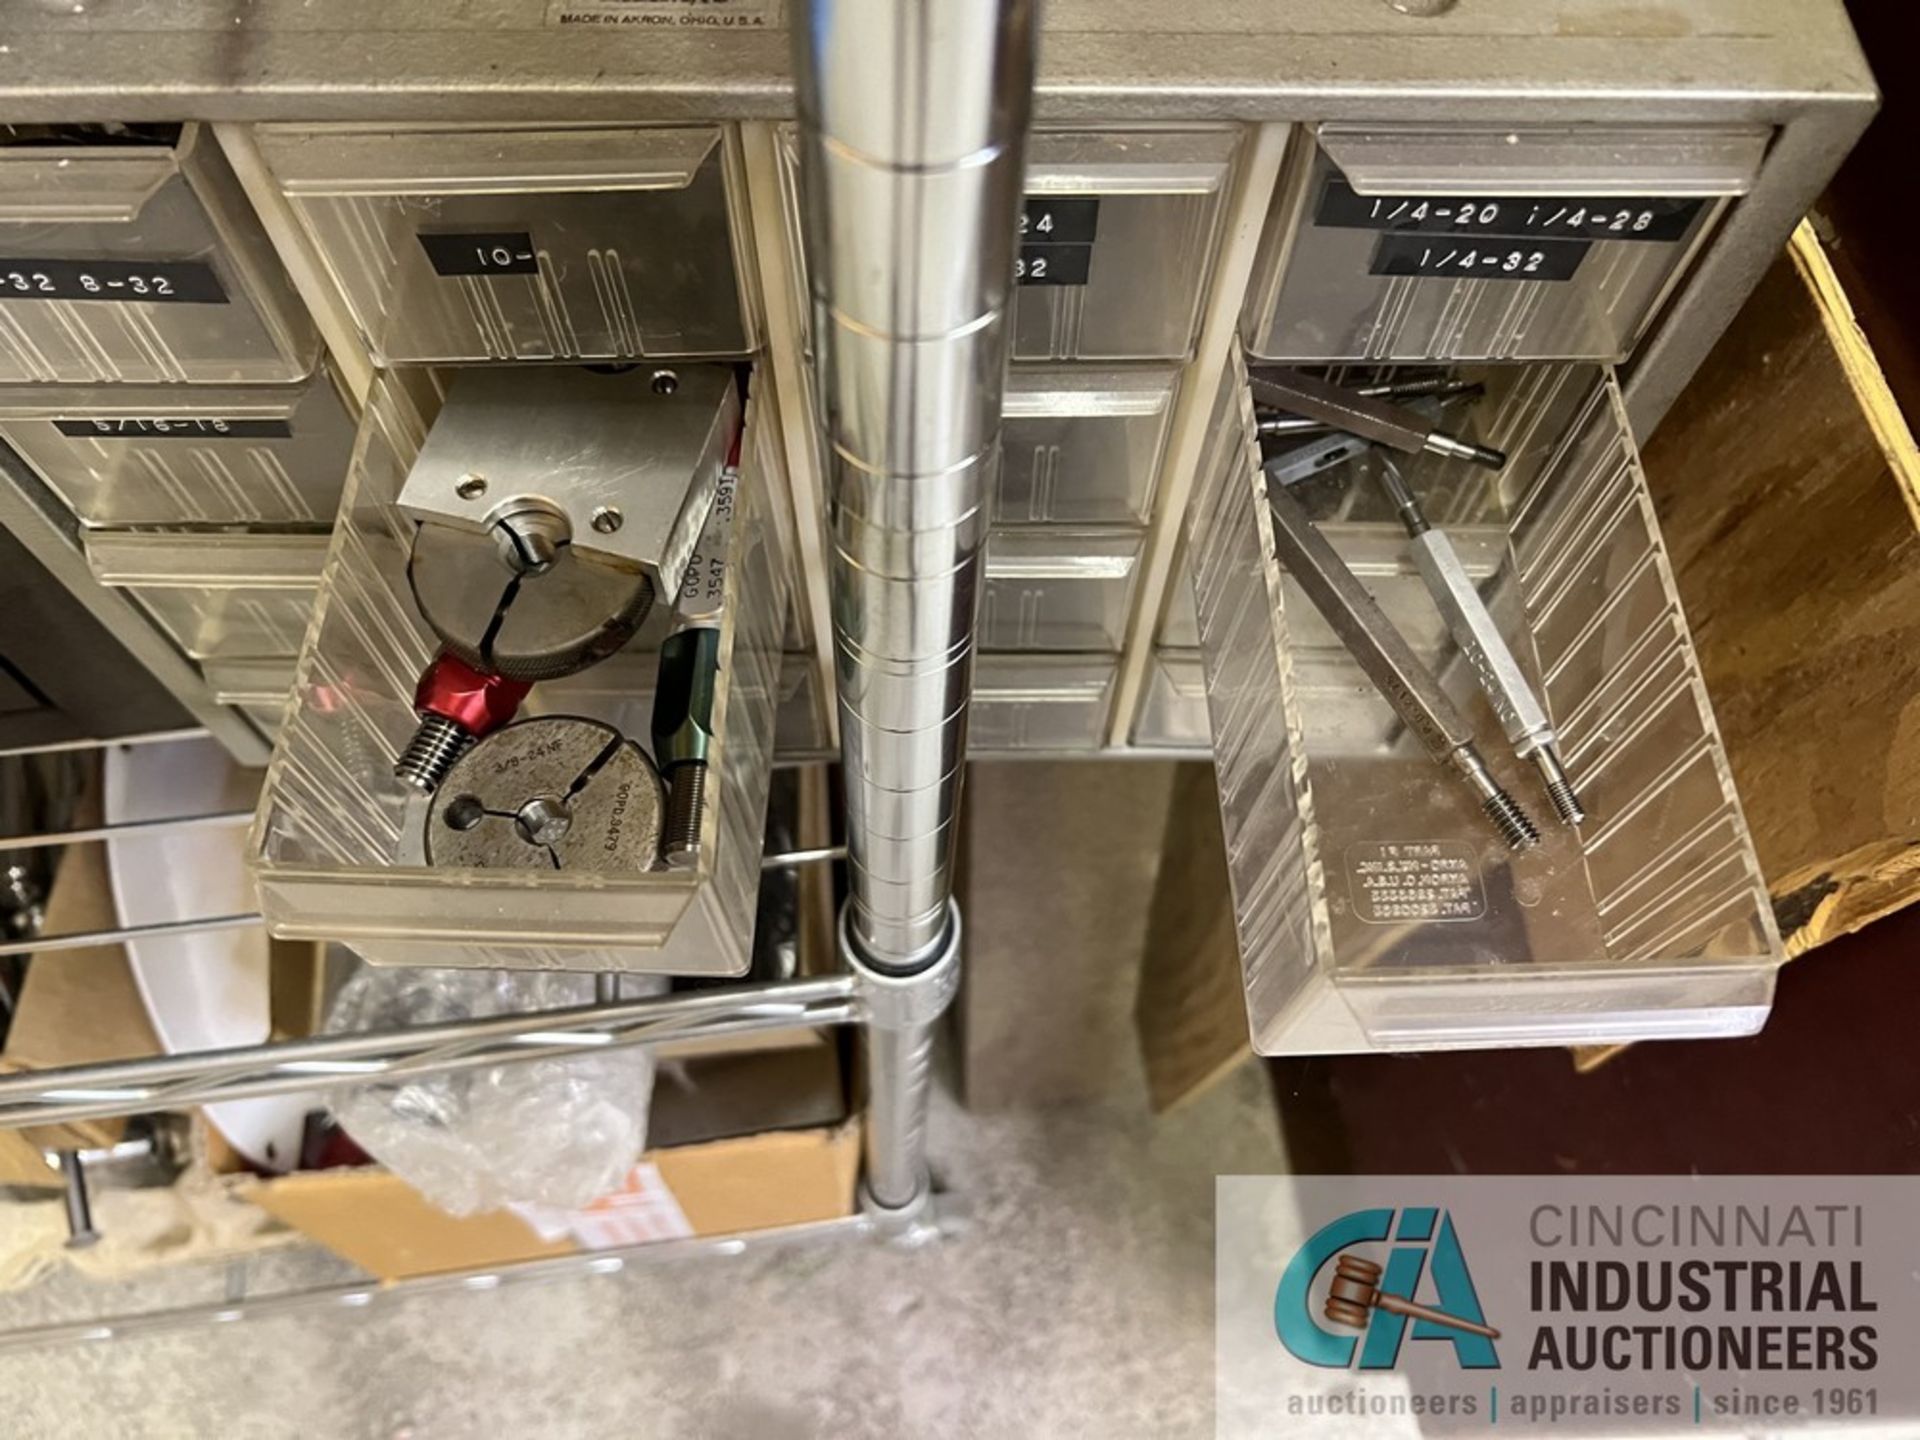 KENNEDY TOOLBOX AND PIGEON HOLE CABINET WITH RING AND THREAD GAGES - Image 5 of 5